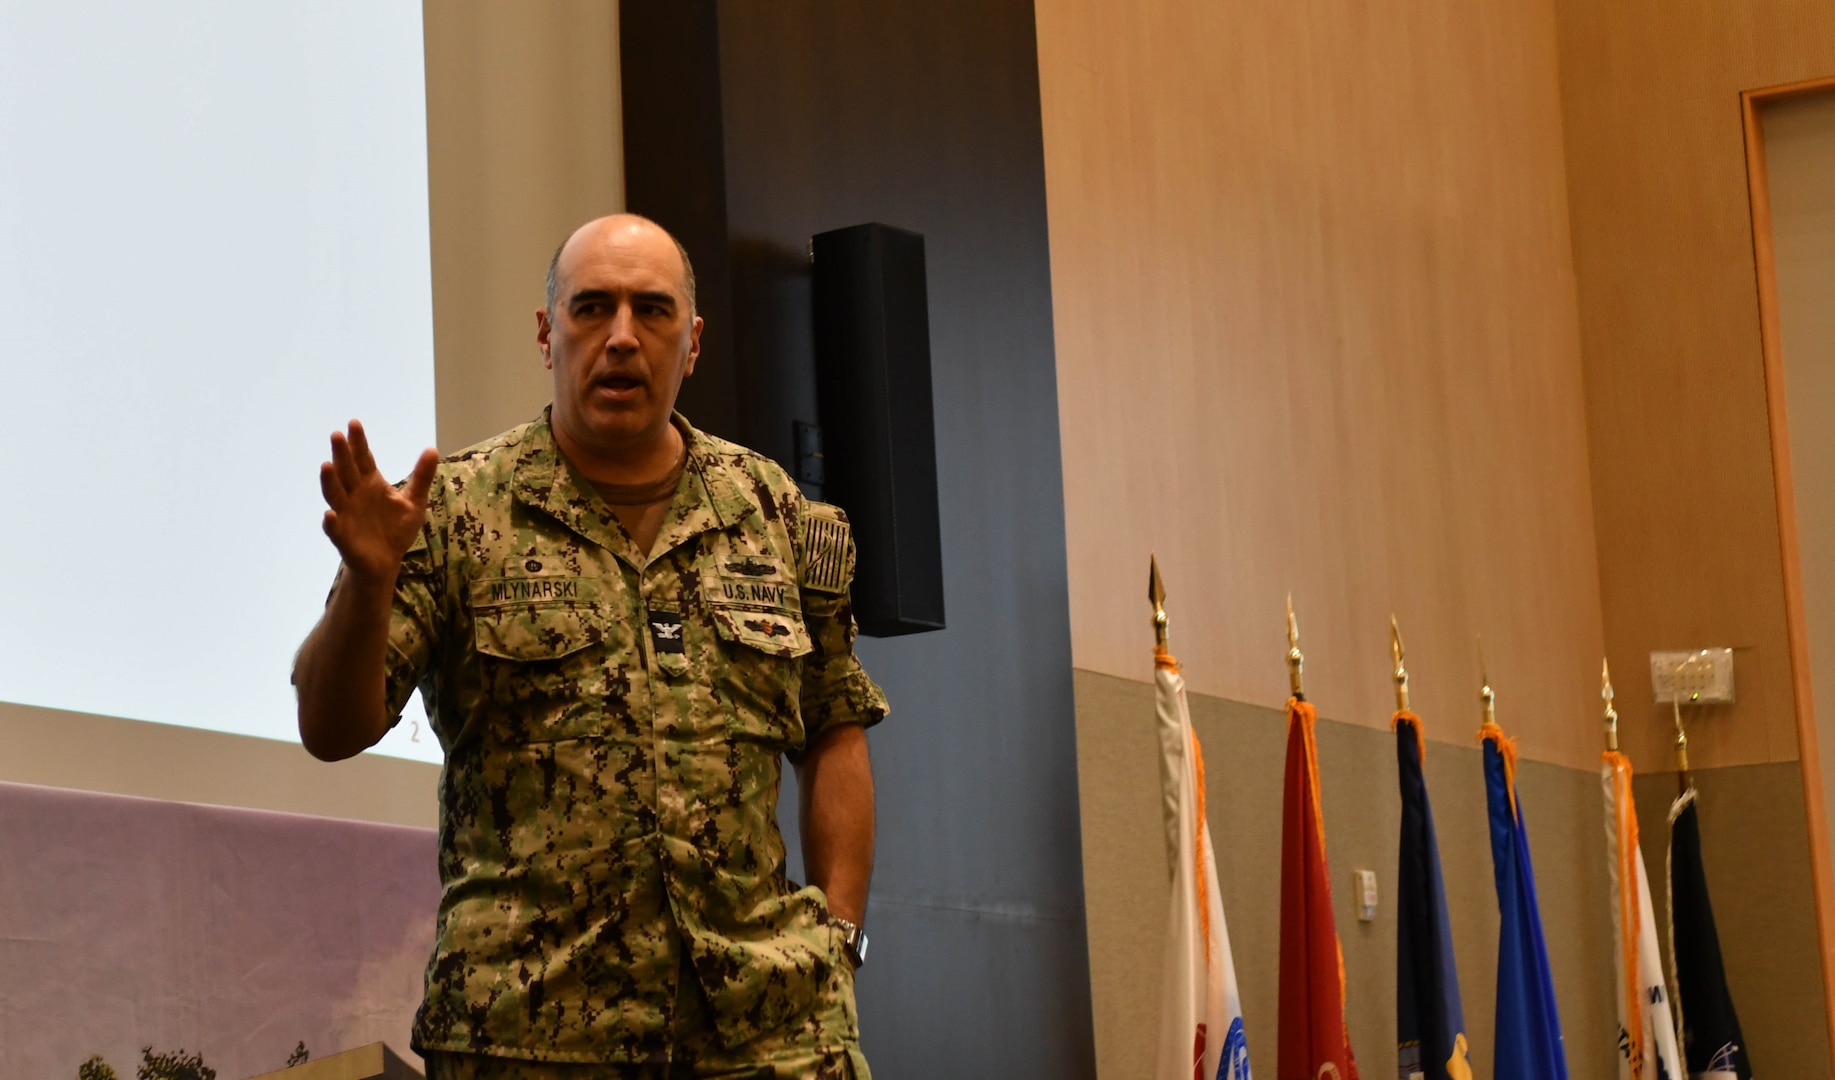 IMAGE: Naval Surface Warfare Center Dahlgren Division (NSWCDD) Commanding Officer Capt. Philip Mlynarski provided the opening remarks for Day Two of the NSWCDD Modeling and Simulation (M&S) Community of Interest M&S Summit July 26 at University of Mary Washington’s Dahlgren Campus.